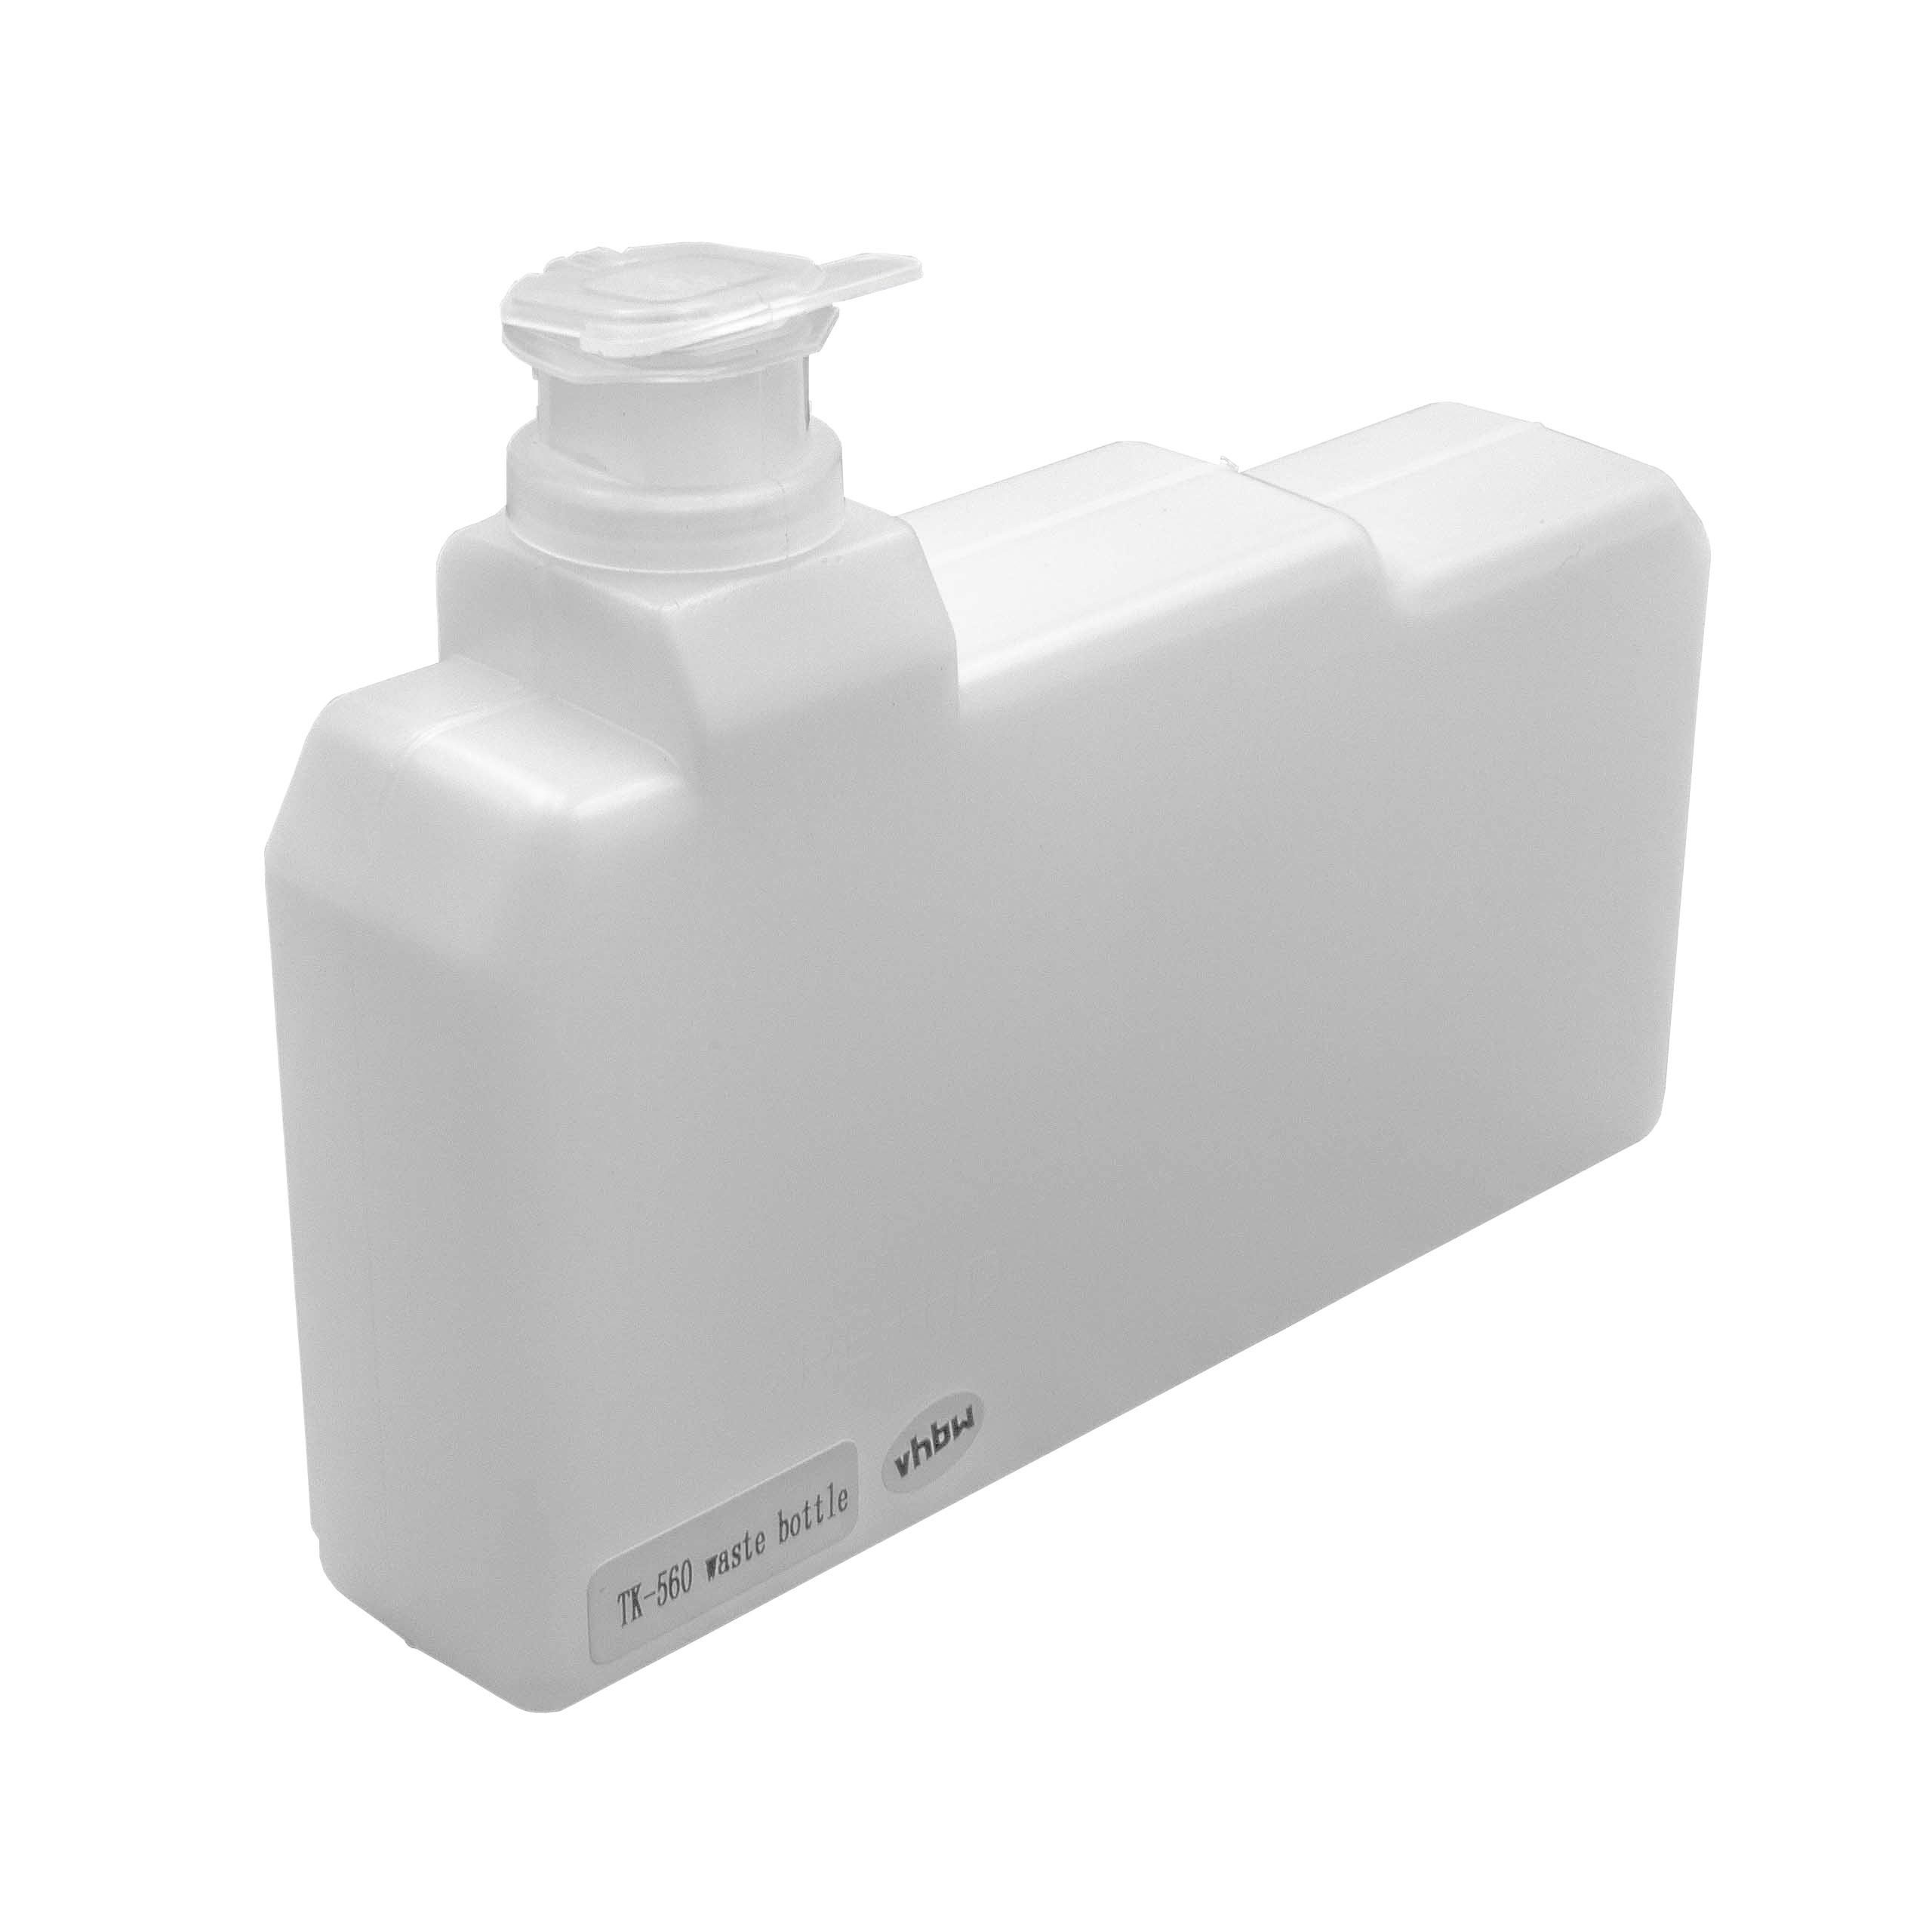 Waste Toner Container as Replacement for Kyocera WT-560 - White